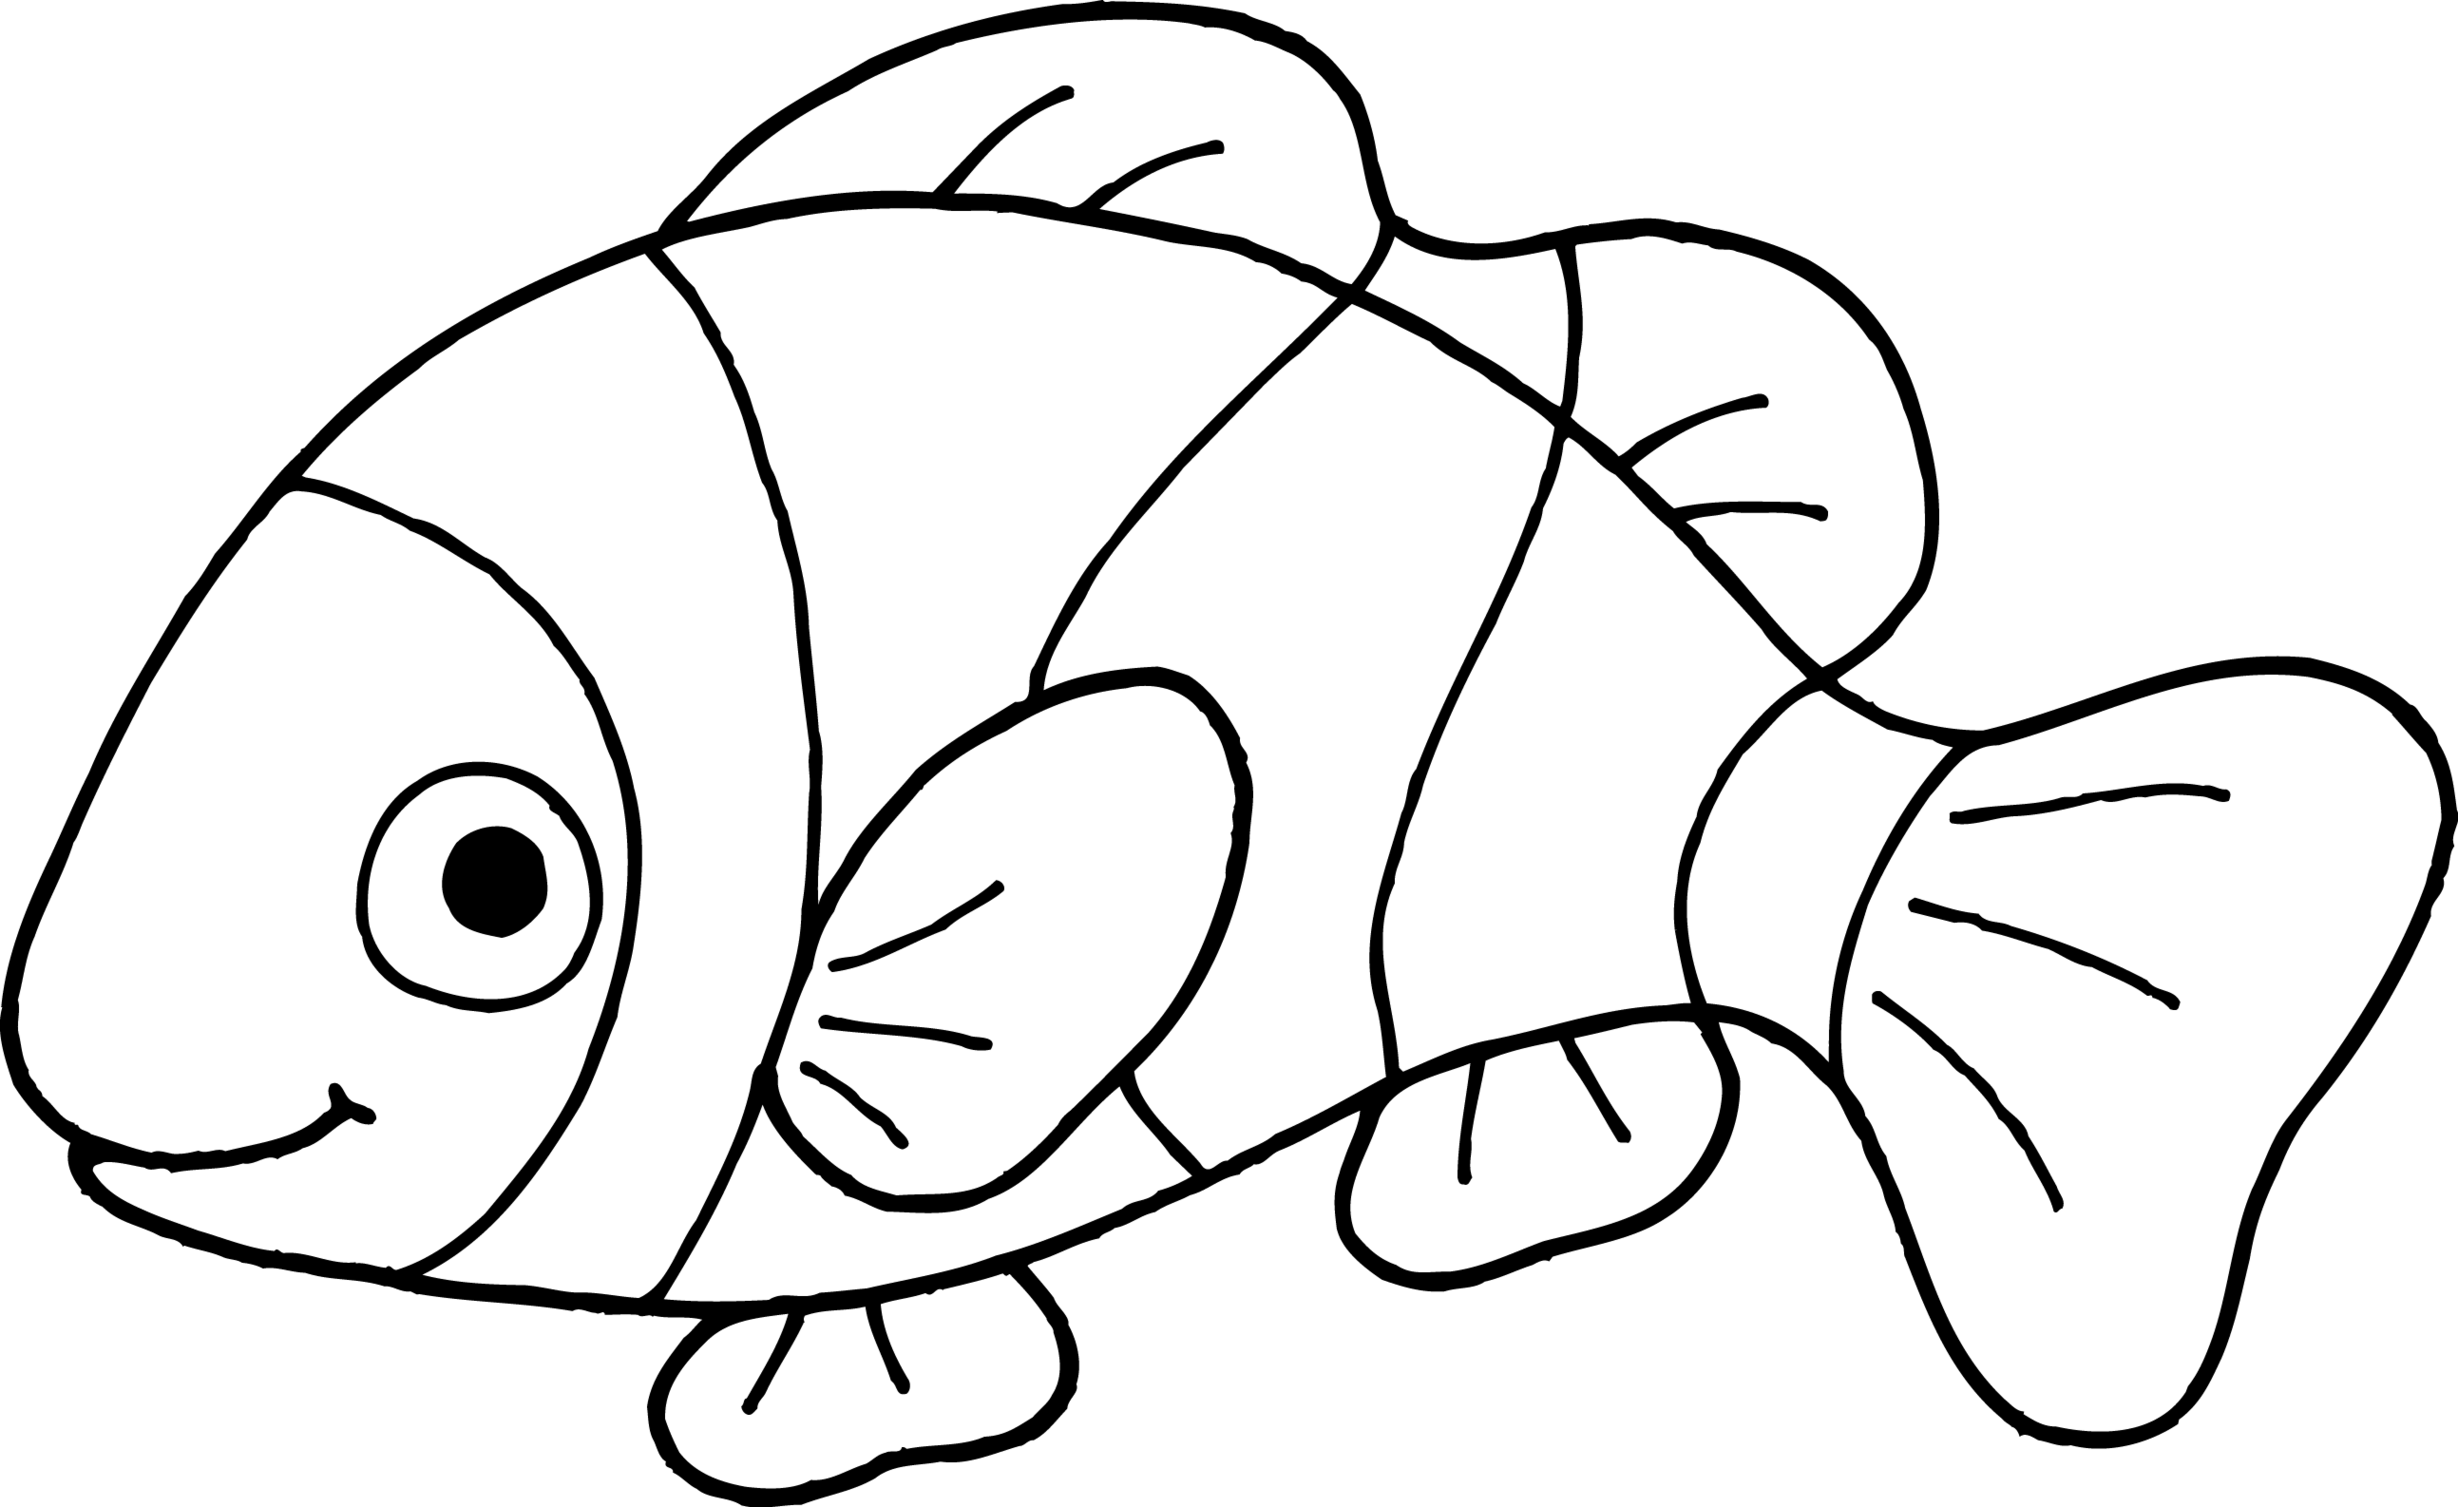 Clownfish Outline Clipart - Free to use Clip Art Resource